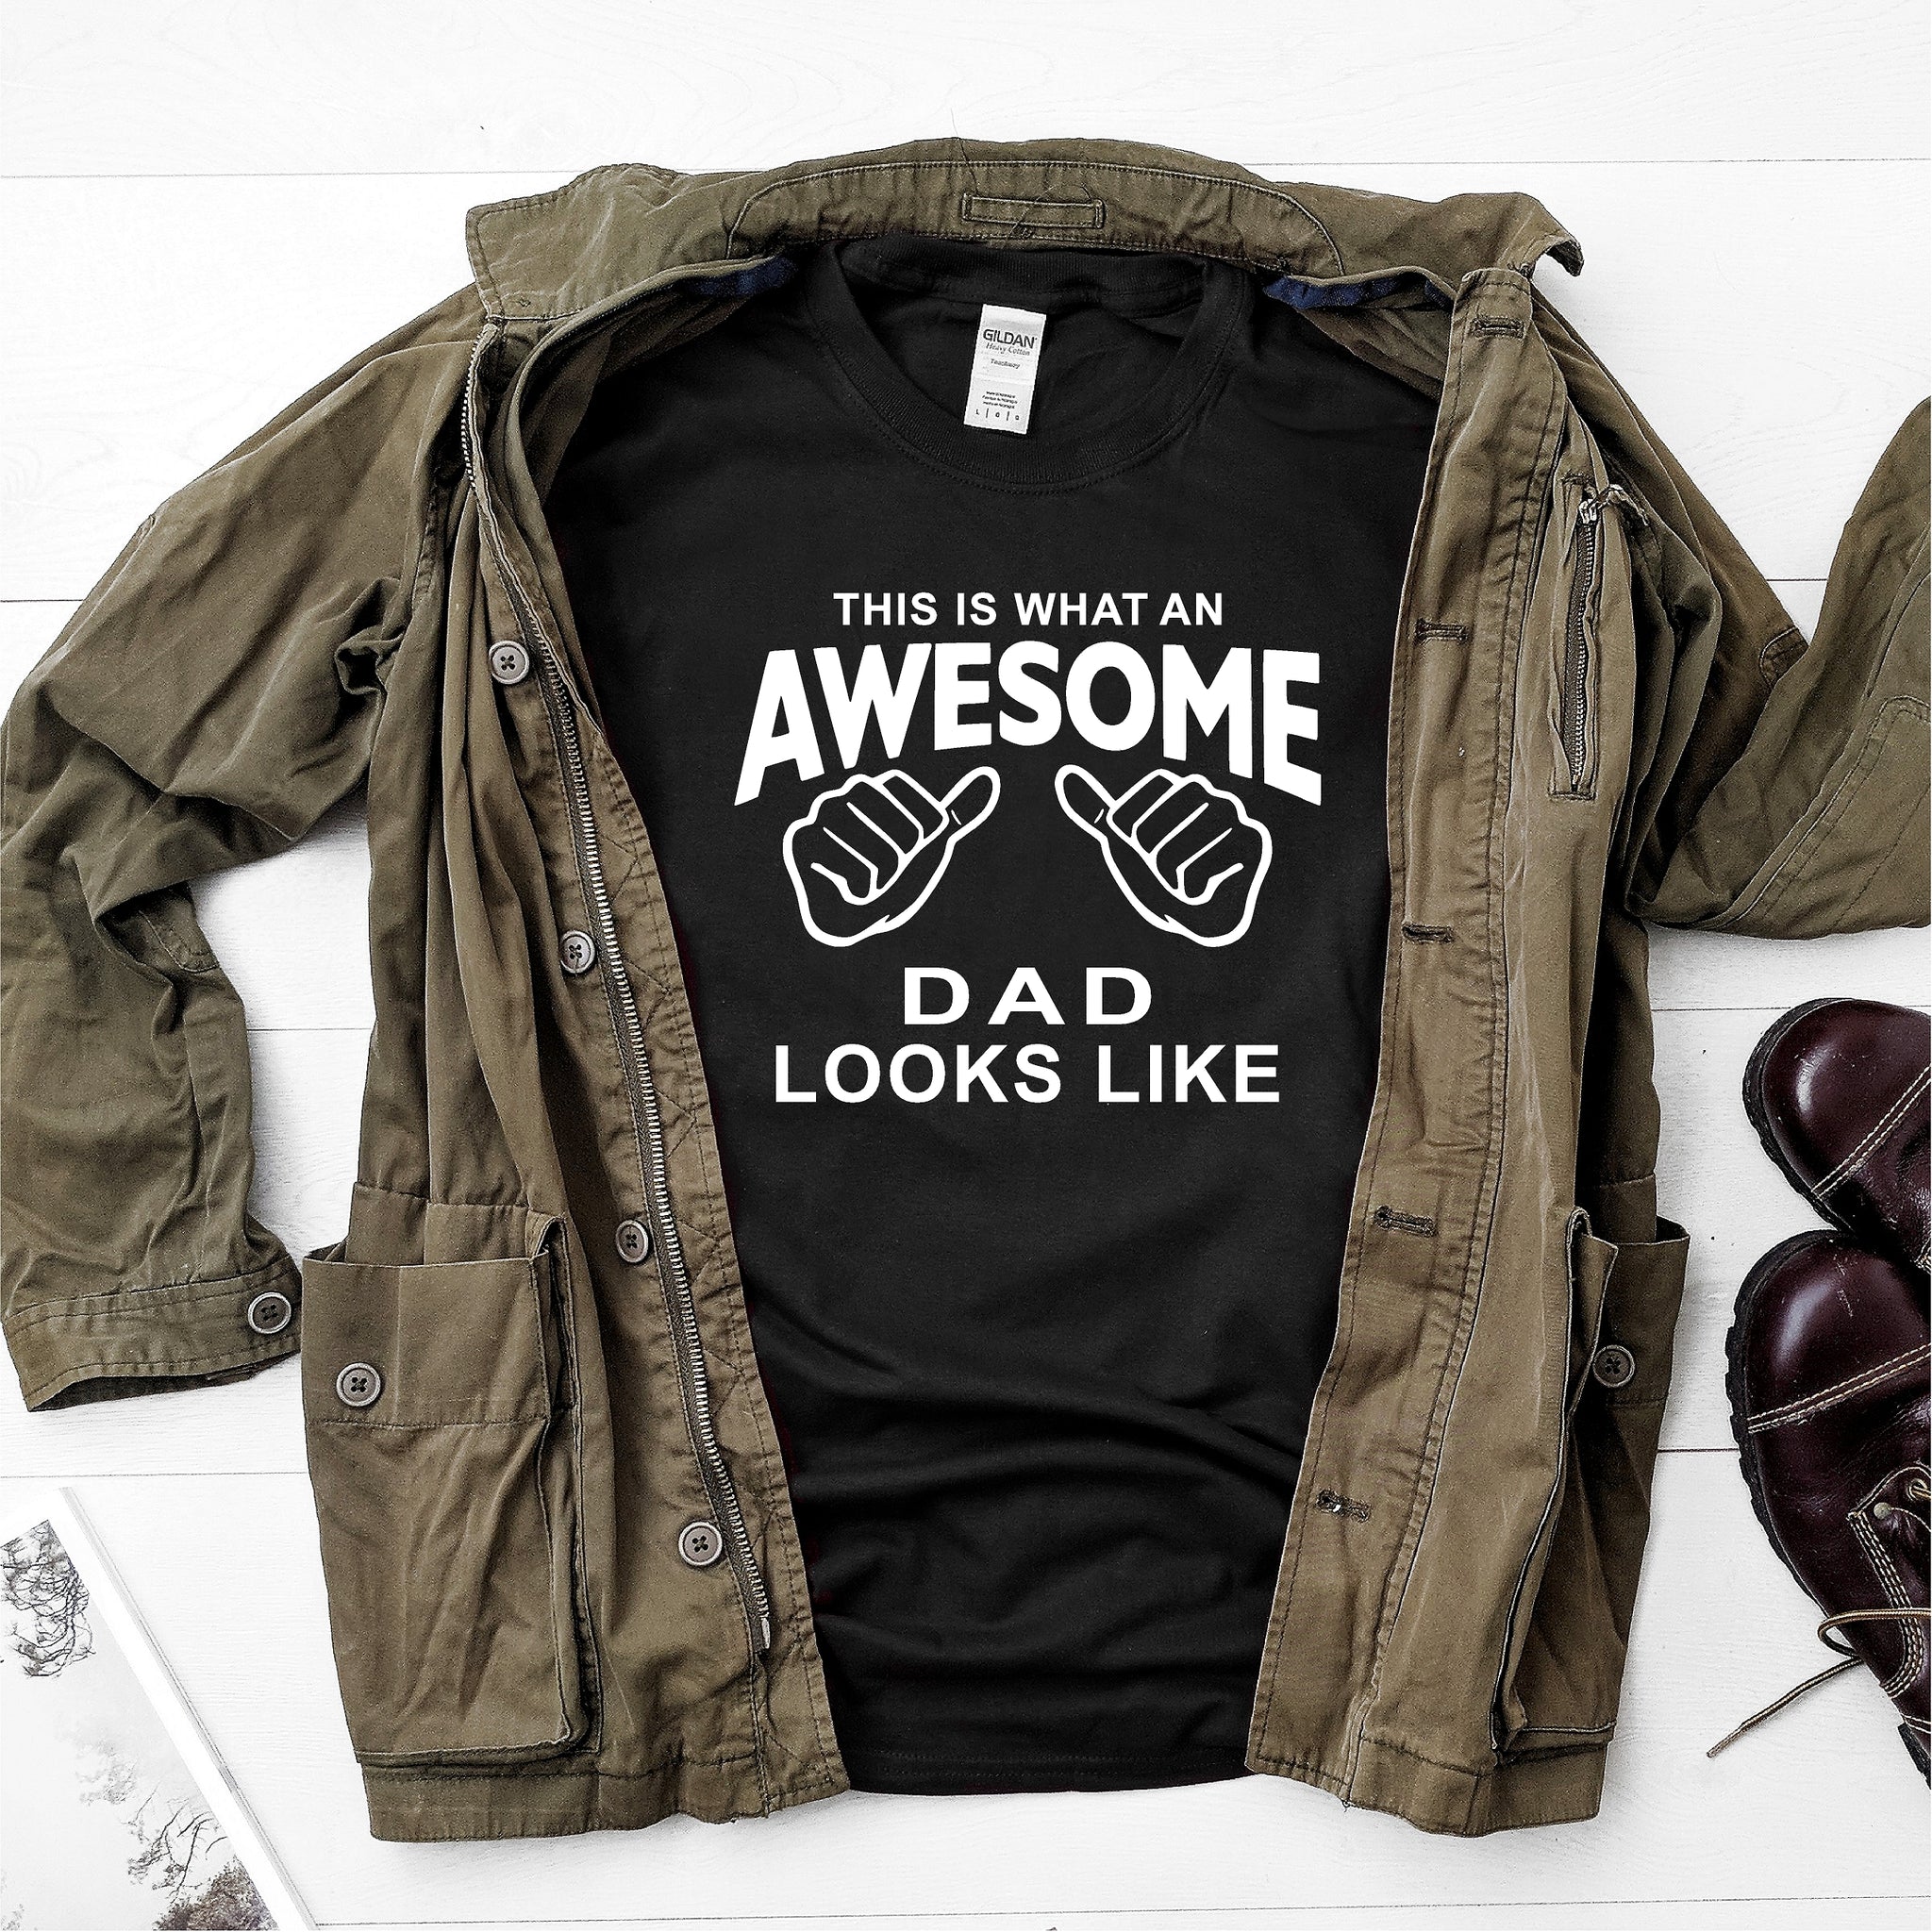 This is what an awesome dad looks like- Ultra Cotton Short Sleeve T-Shirt - DFHM58